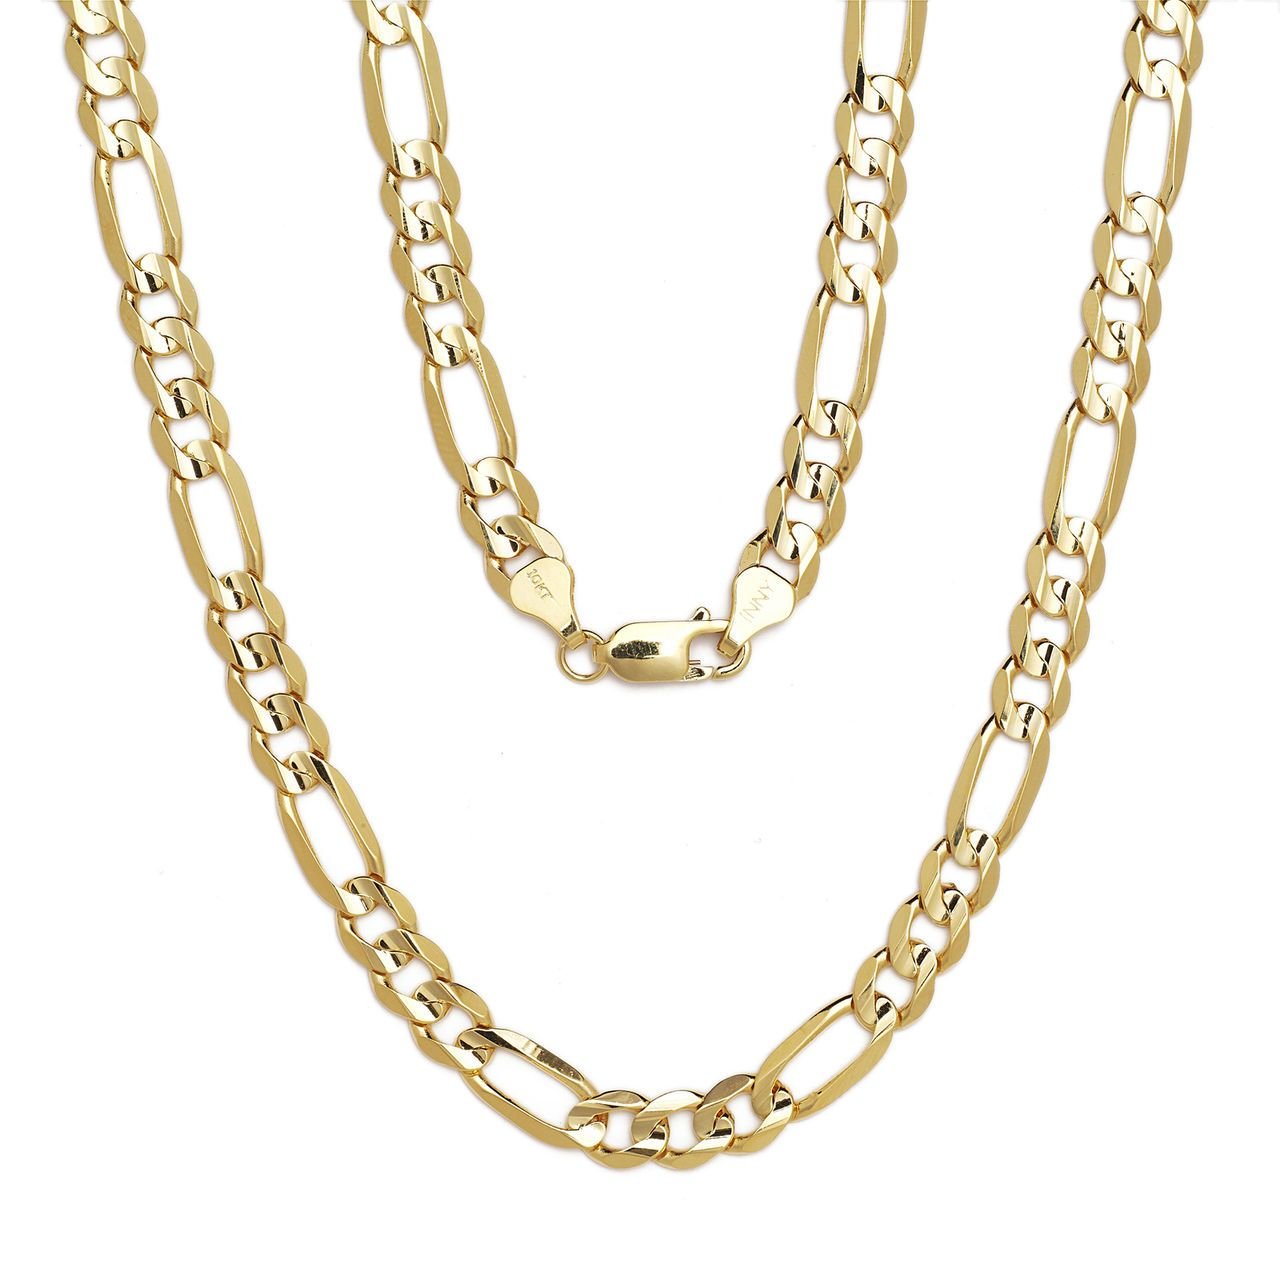 10k Yellow Gold Figaro Chain Necklace with Concave Look, 0.35 Inch (9mm)